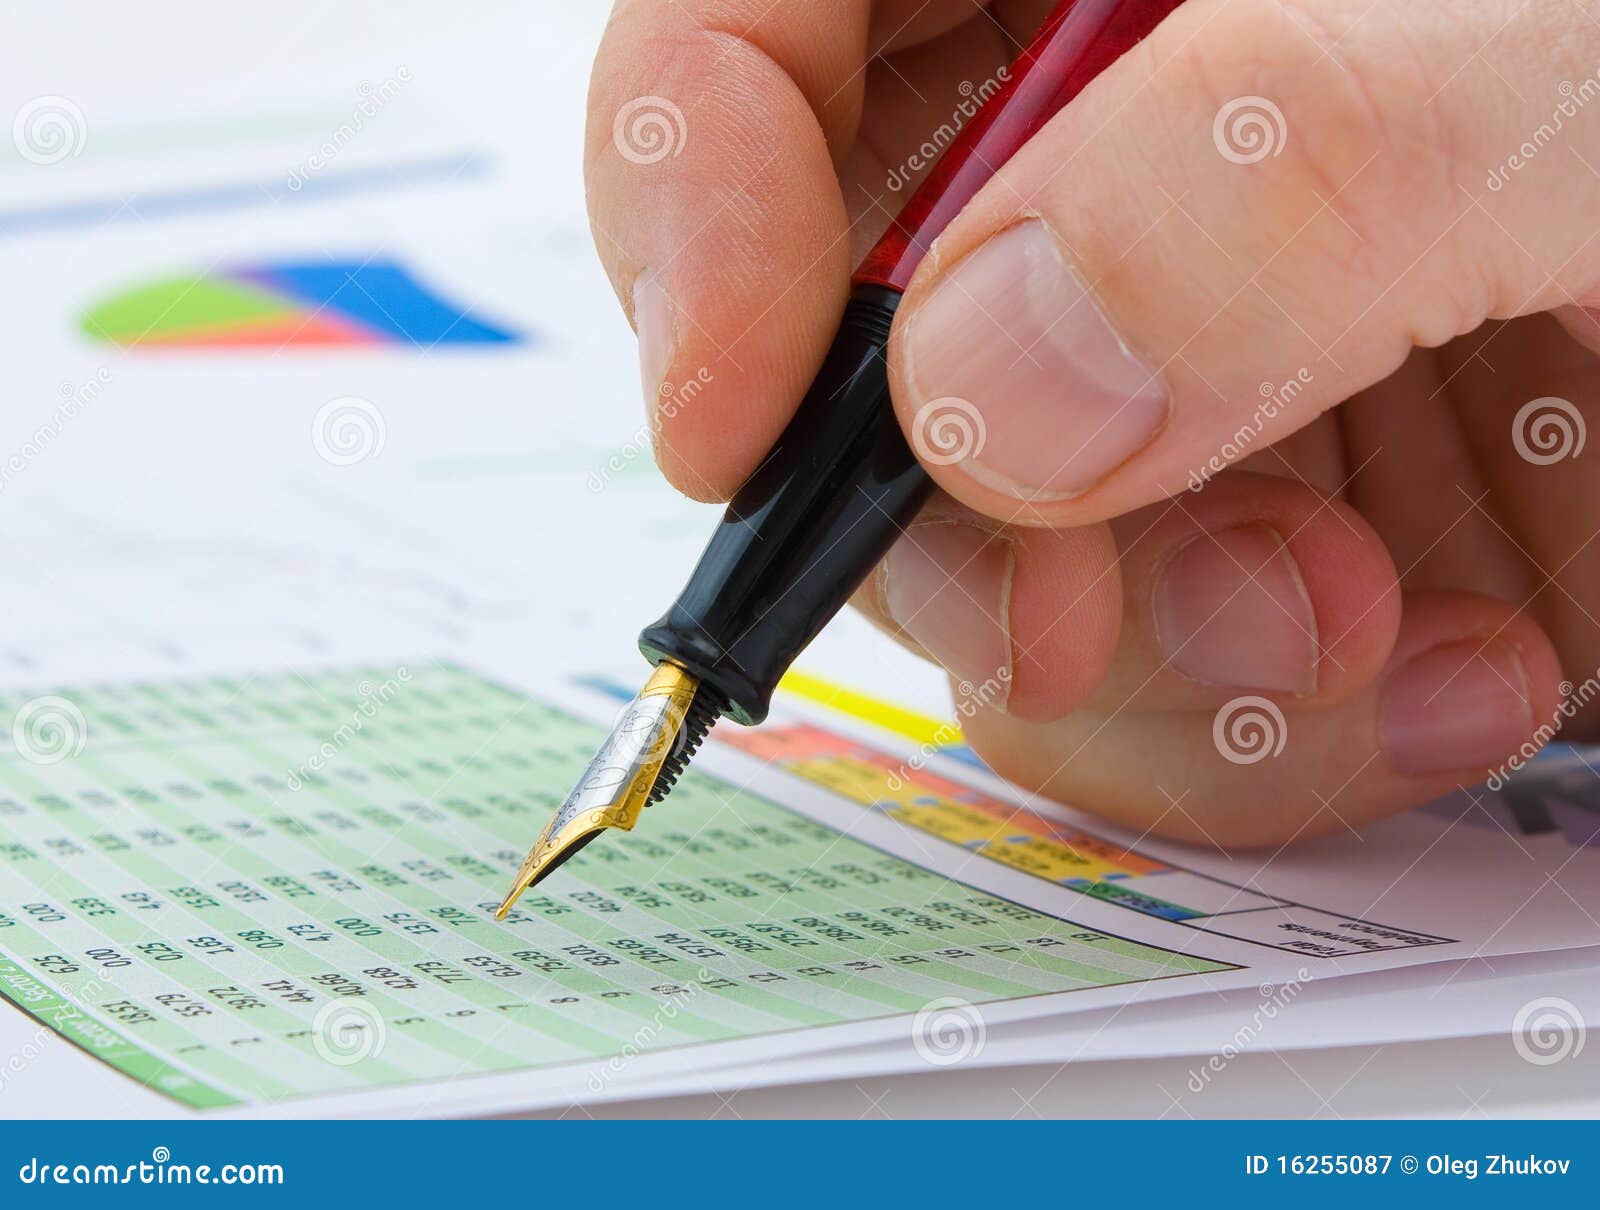 Graphs Tables and Documents Stock Image - Image of performance, office ...